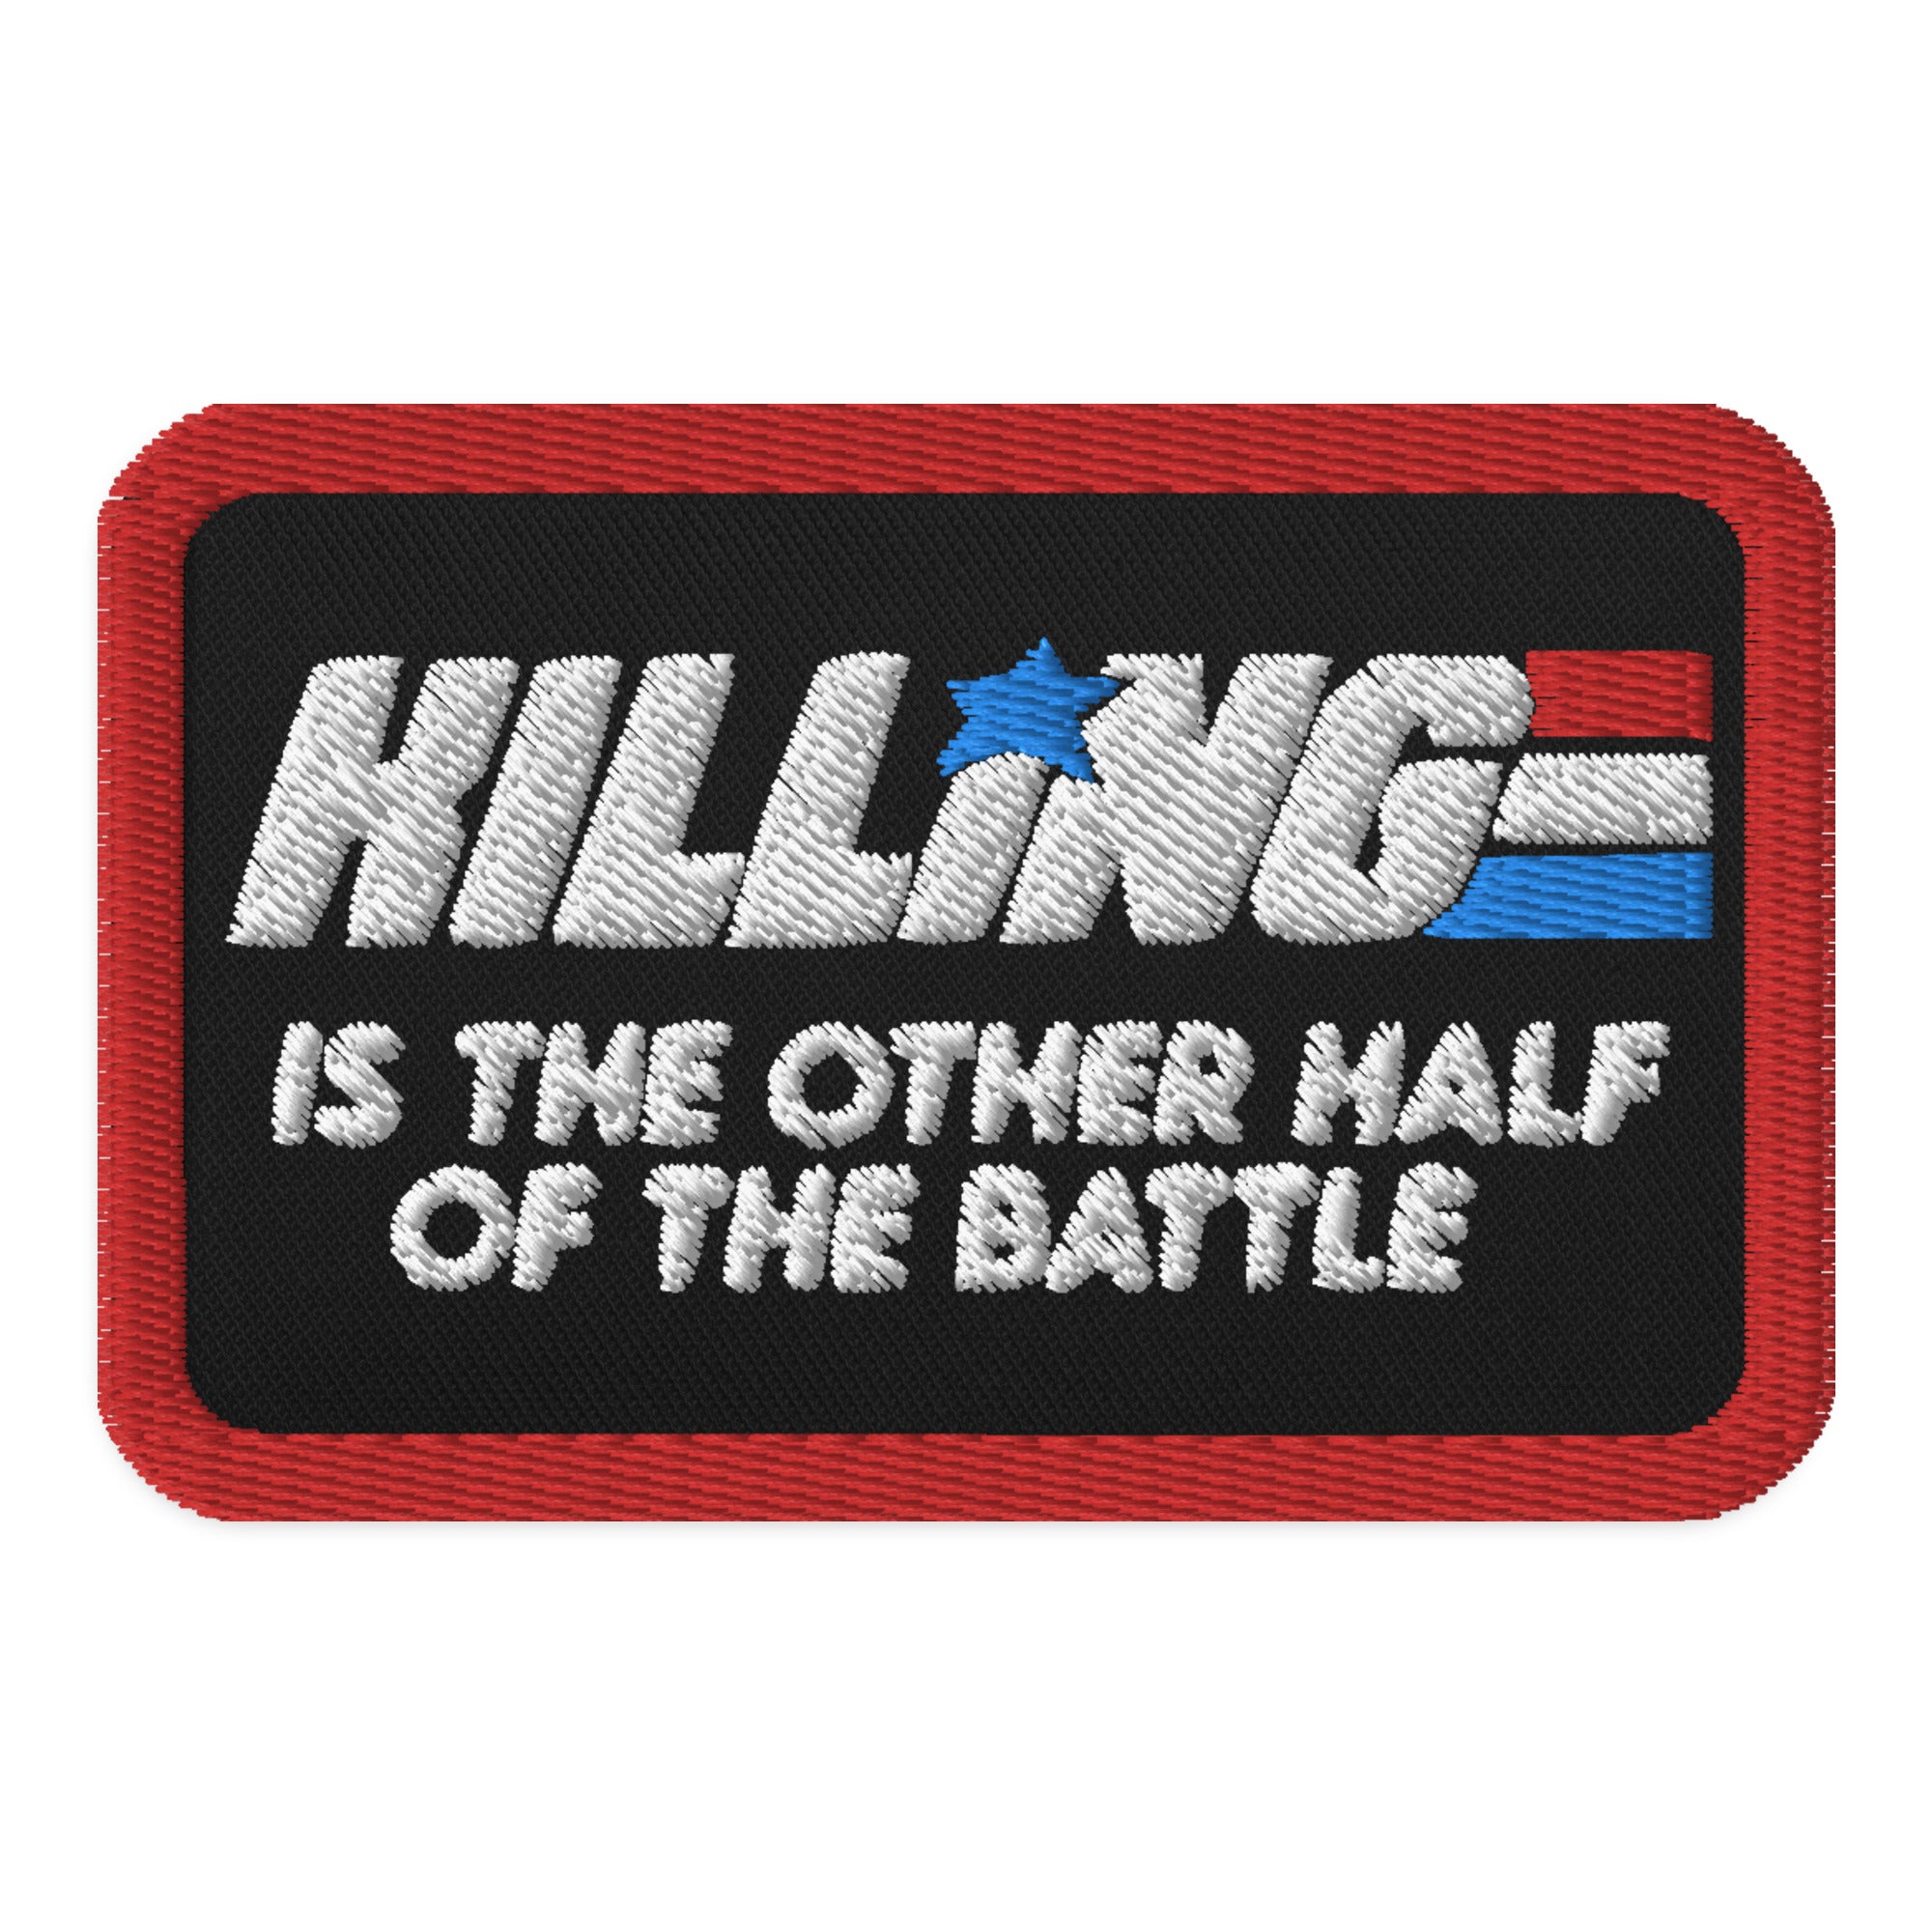 The Other Half of the Battle Morale Patch